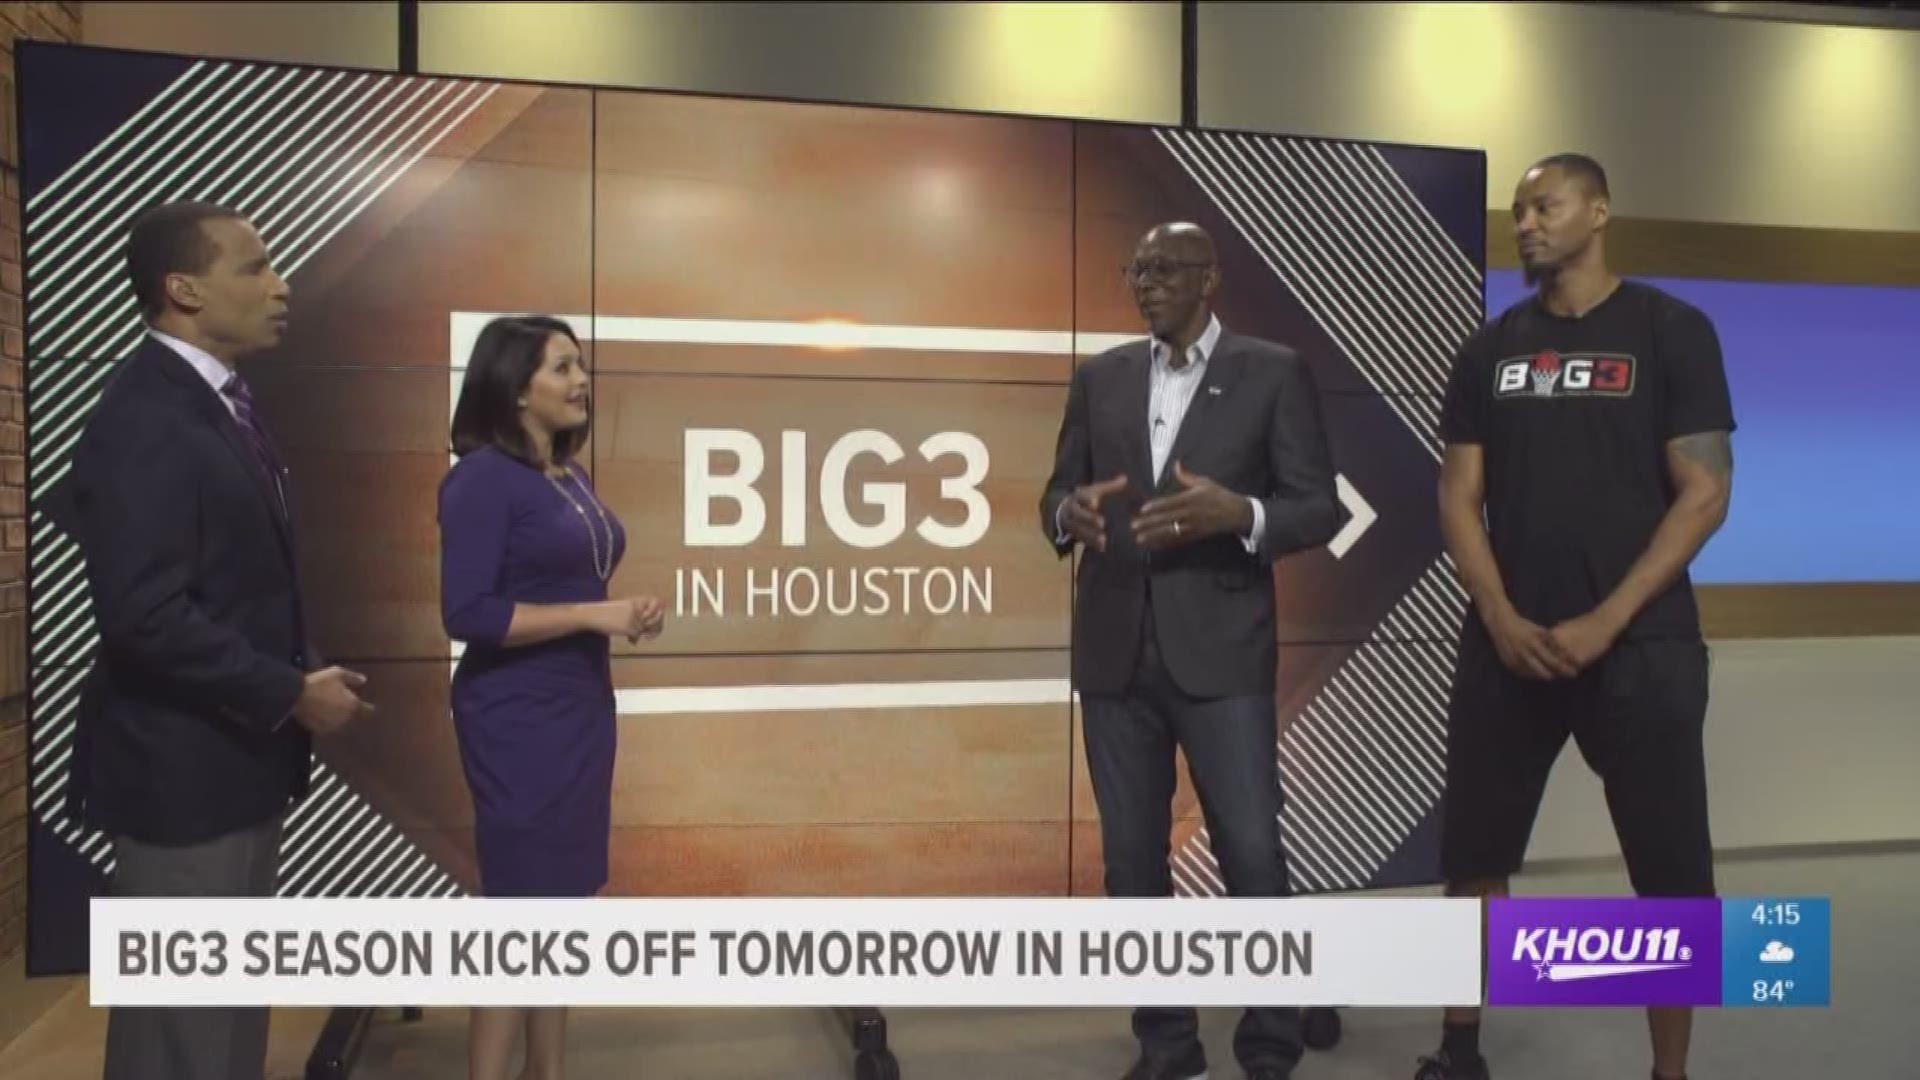 BIG3 Commissioner and Hall of Famer Clyde Drexler, along with BIG3 Team Captain and former NBA player Rashard Lewis, stopped by KHOU 11 to talk about the BIG3's second season that tips off in Houston on Friday.